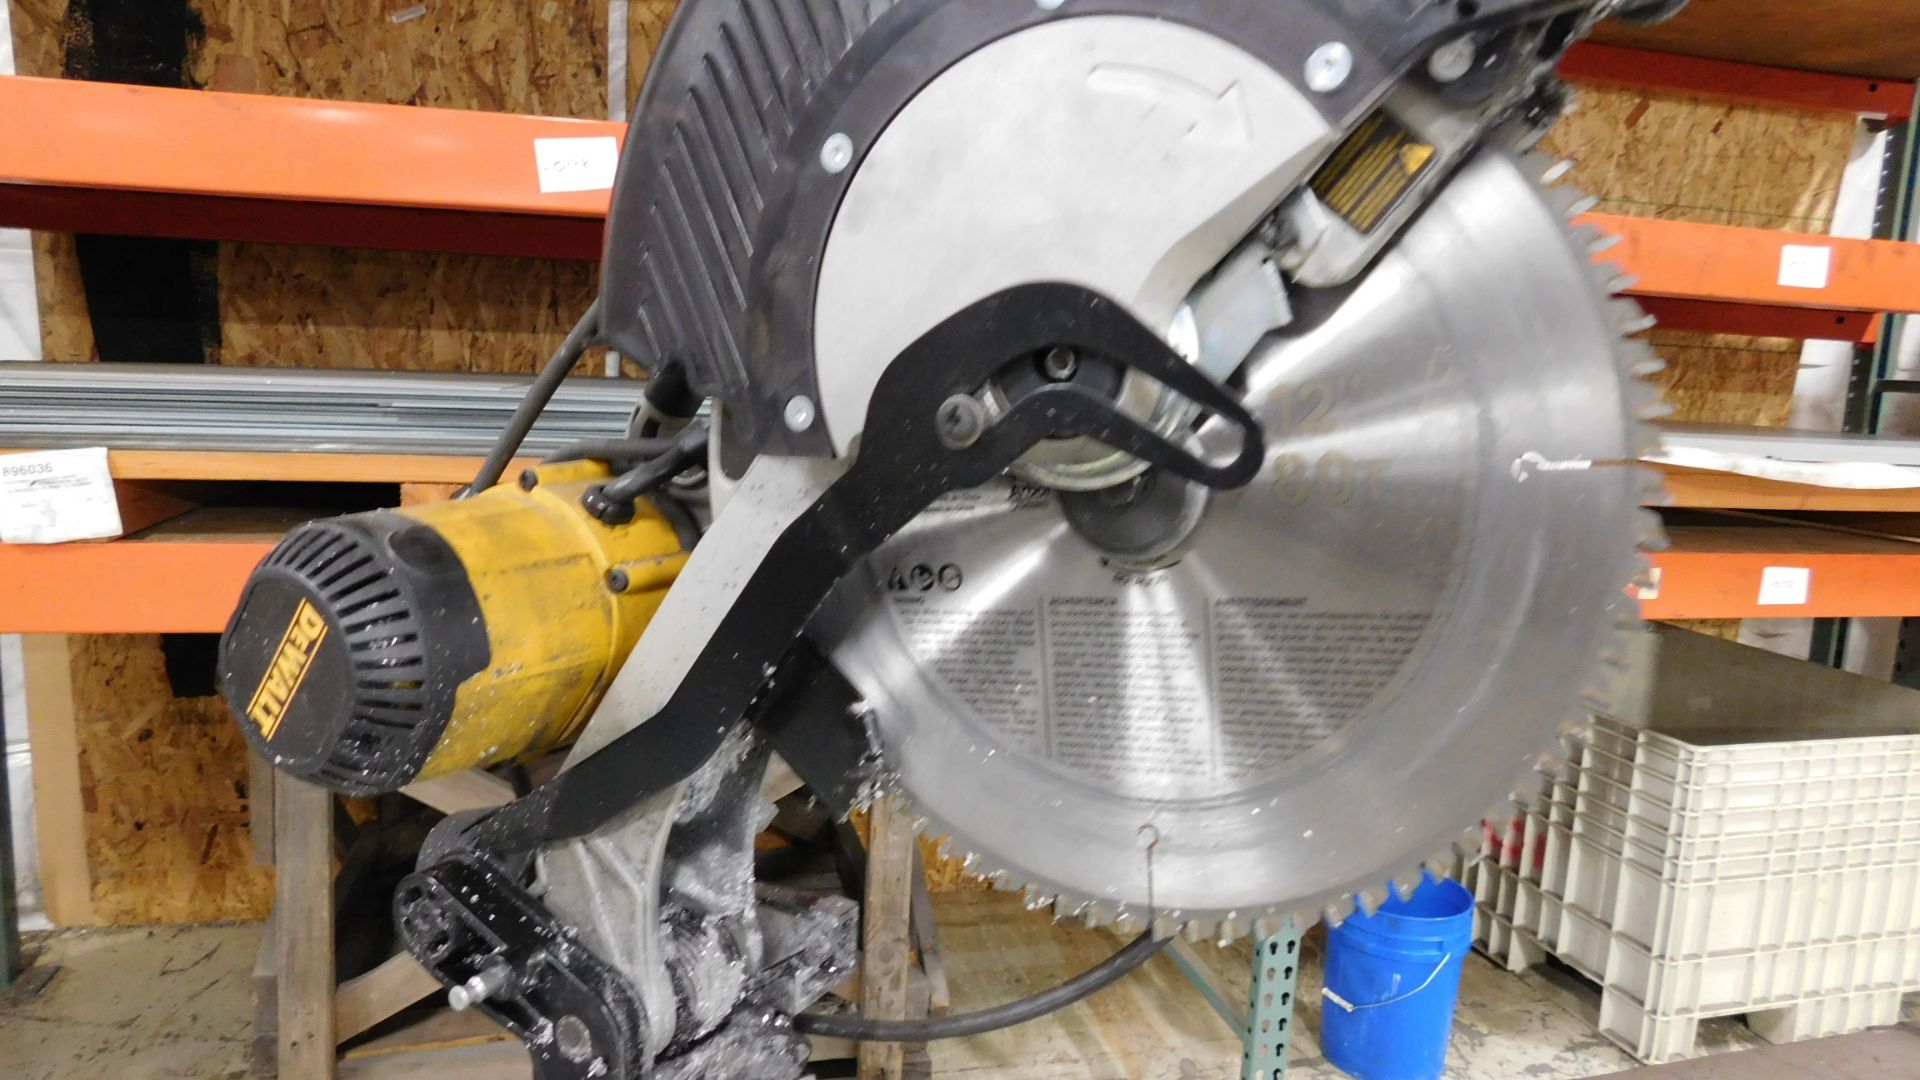 DEWALT 12" CHOP SAW, MODEL DW716, W/SIDE EXTENSIONS FOR LONG MATERIAL, BOLTED ONTO ROLLING CART, - Image 7 of 7